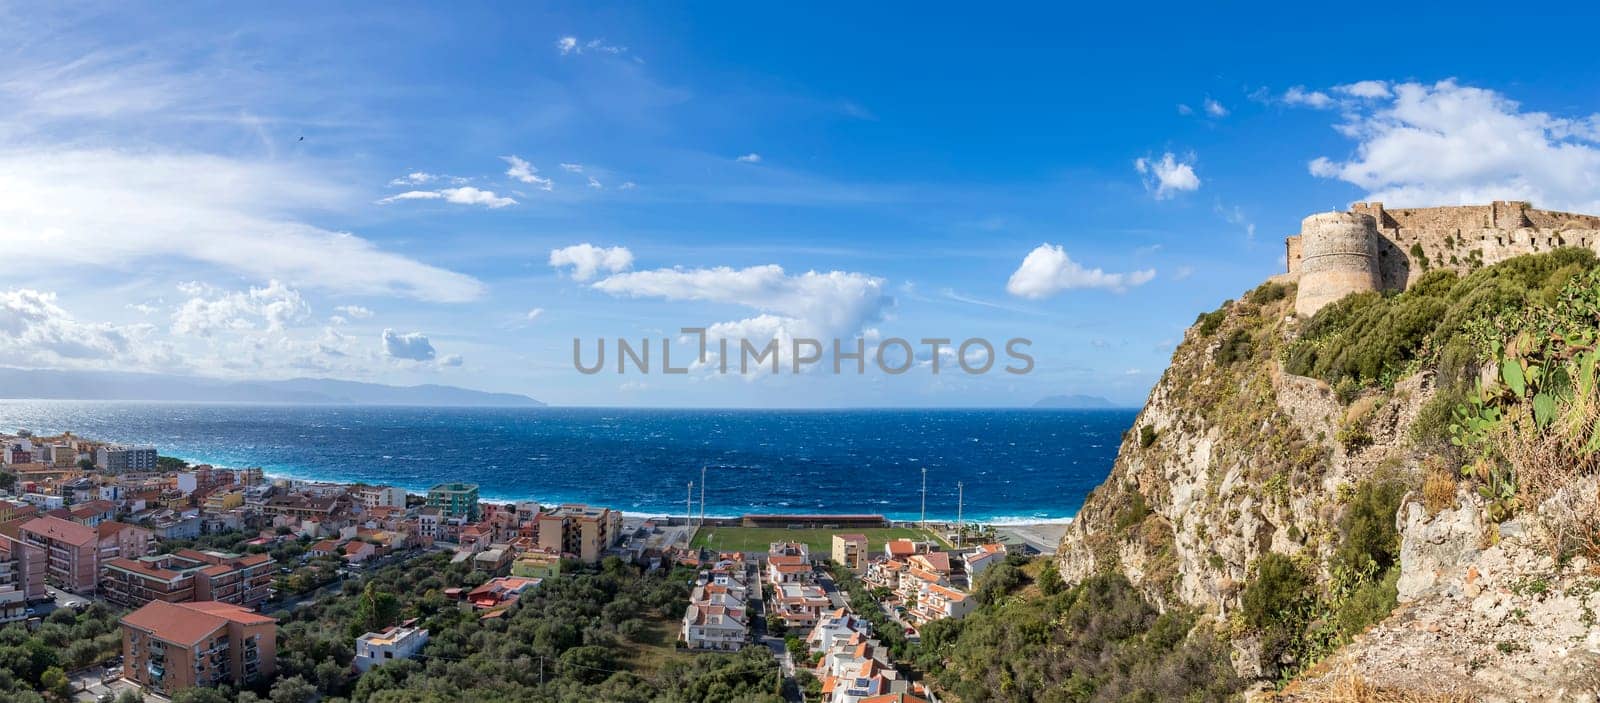 Panoramic view of the coast of Cefalu and fortress in la Roca in Sicily, Italy